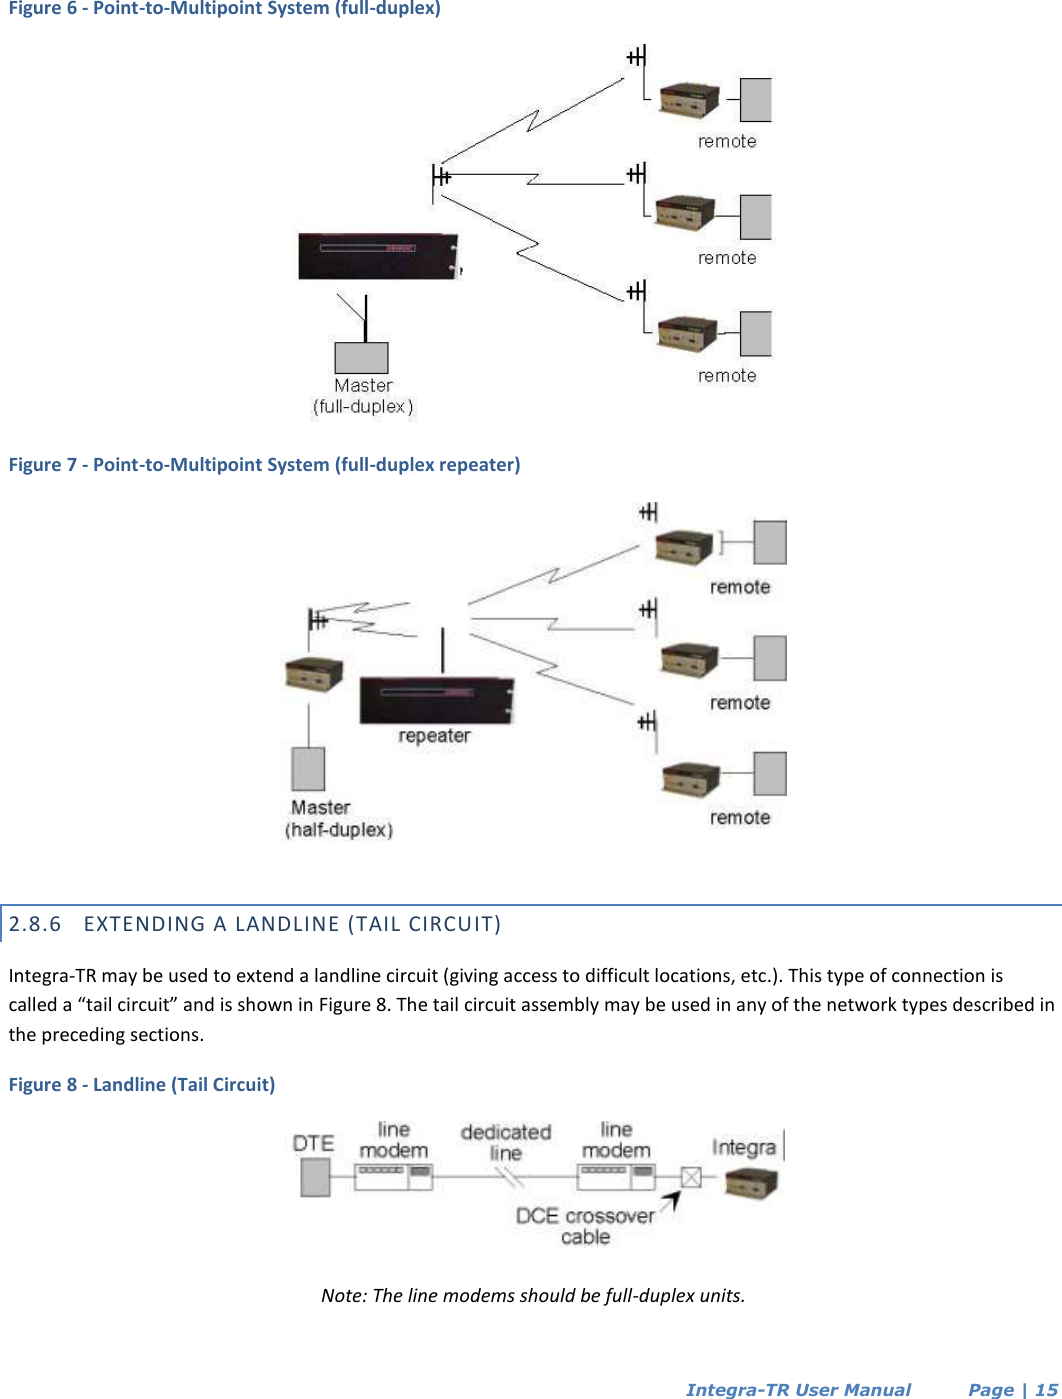  Integra-TR User Manual          Page | 15   Figure 6 - Point-to-Multipoint System (full-duplex)  Figure 7 - Point-to-Multipoint System (full-duplex repeater)  2.8.6 EXTENDING A LANDLINE (TAIL CIRCUIT) Integra-TR may be used to extend a landline circuit (giving access to difficult locations, etc.). This type of connection is called a “tail circuit” and is shown in Figure 8. The tail circuit assembly may be used in any of the network types described in the preceding sections. Figure 8 - Landline (Tail Circuit)  Note: The line modems should be full-duplex units.  